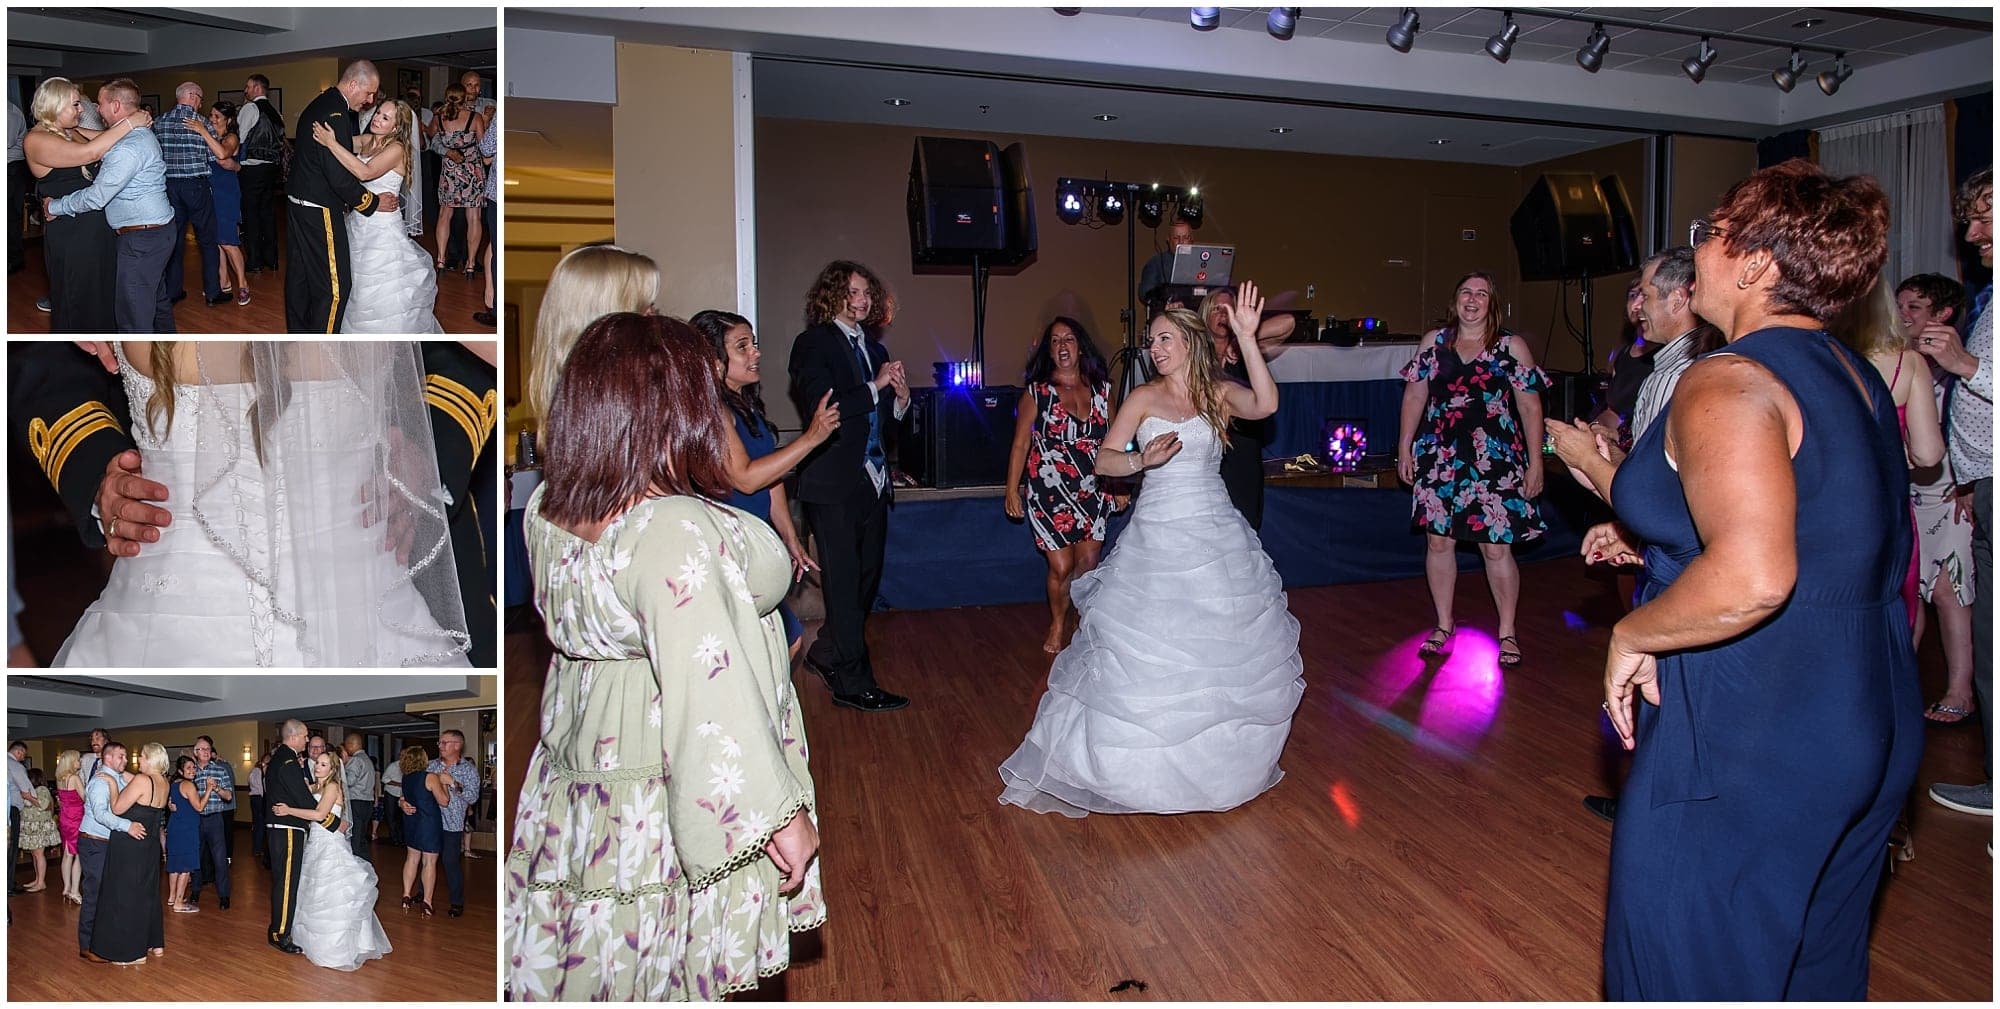 The bride and groom dance with their guests during their Juno Tower wedding reception.